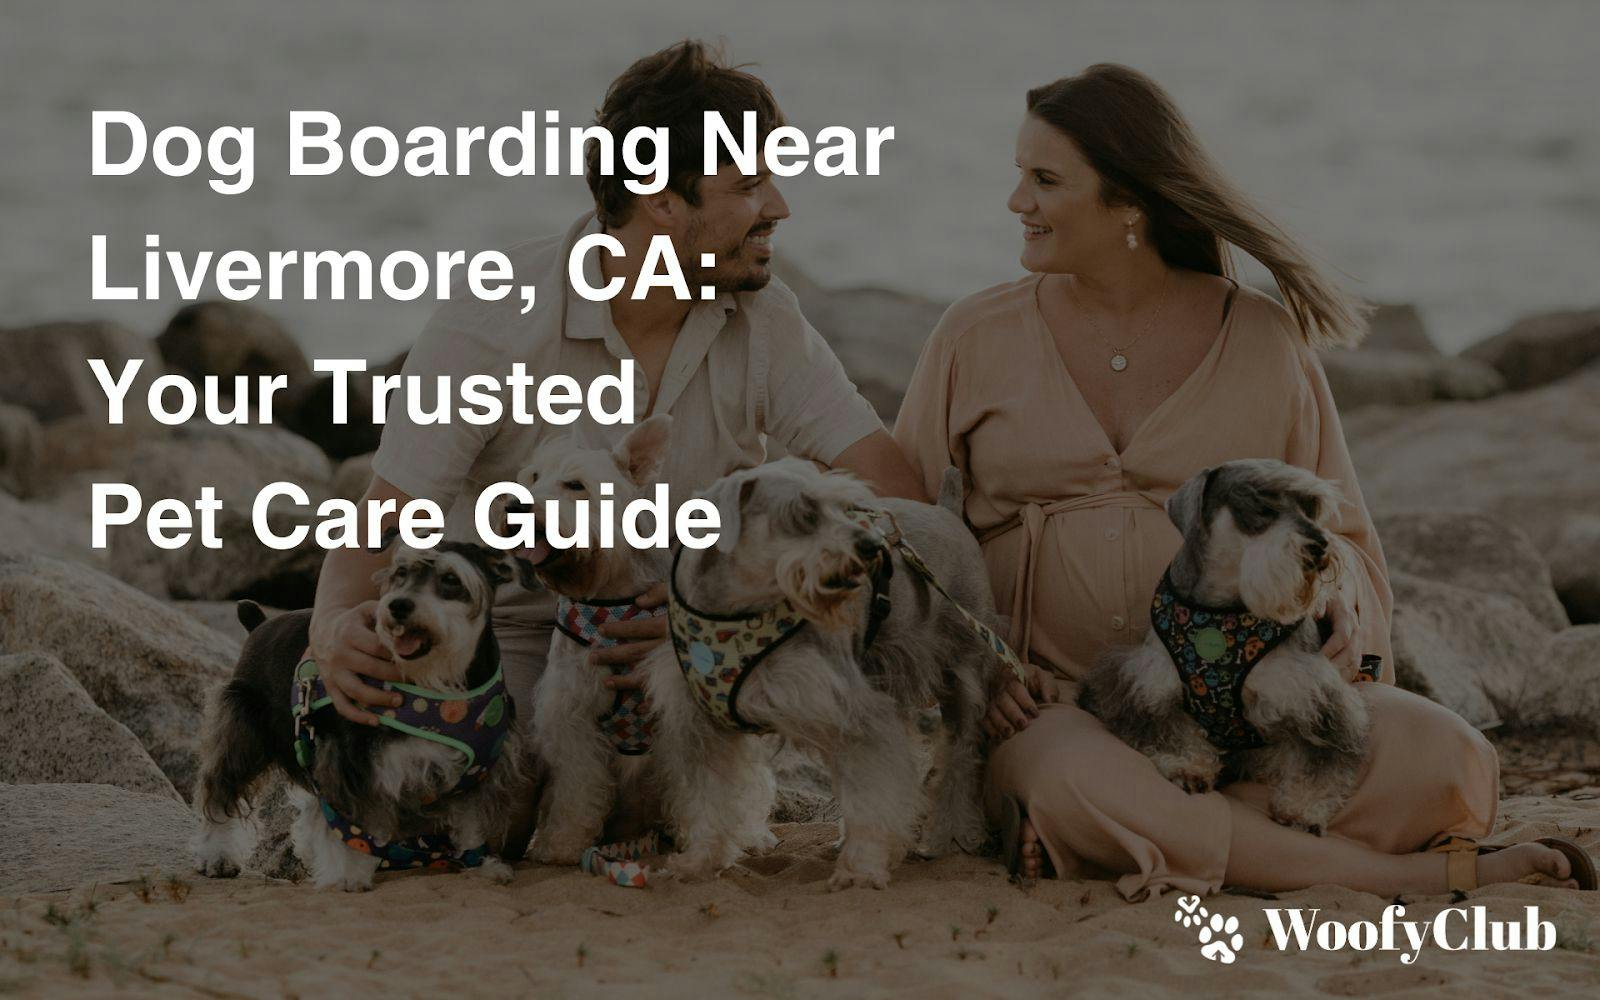 Dog Boarding Near Livermore, CA: Your Trusted Pet Care Guide